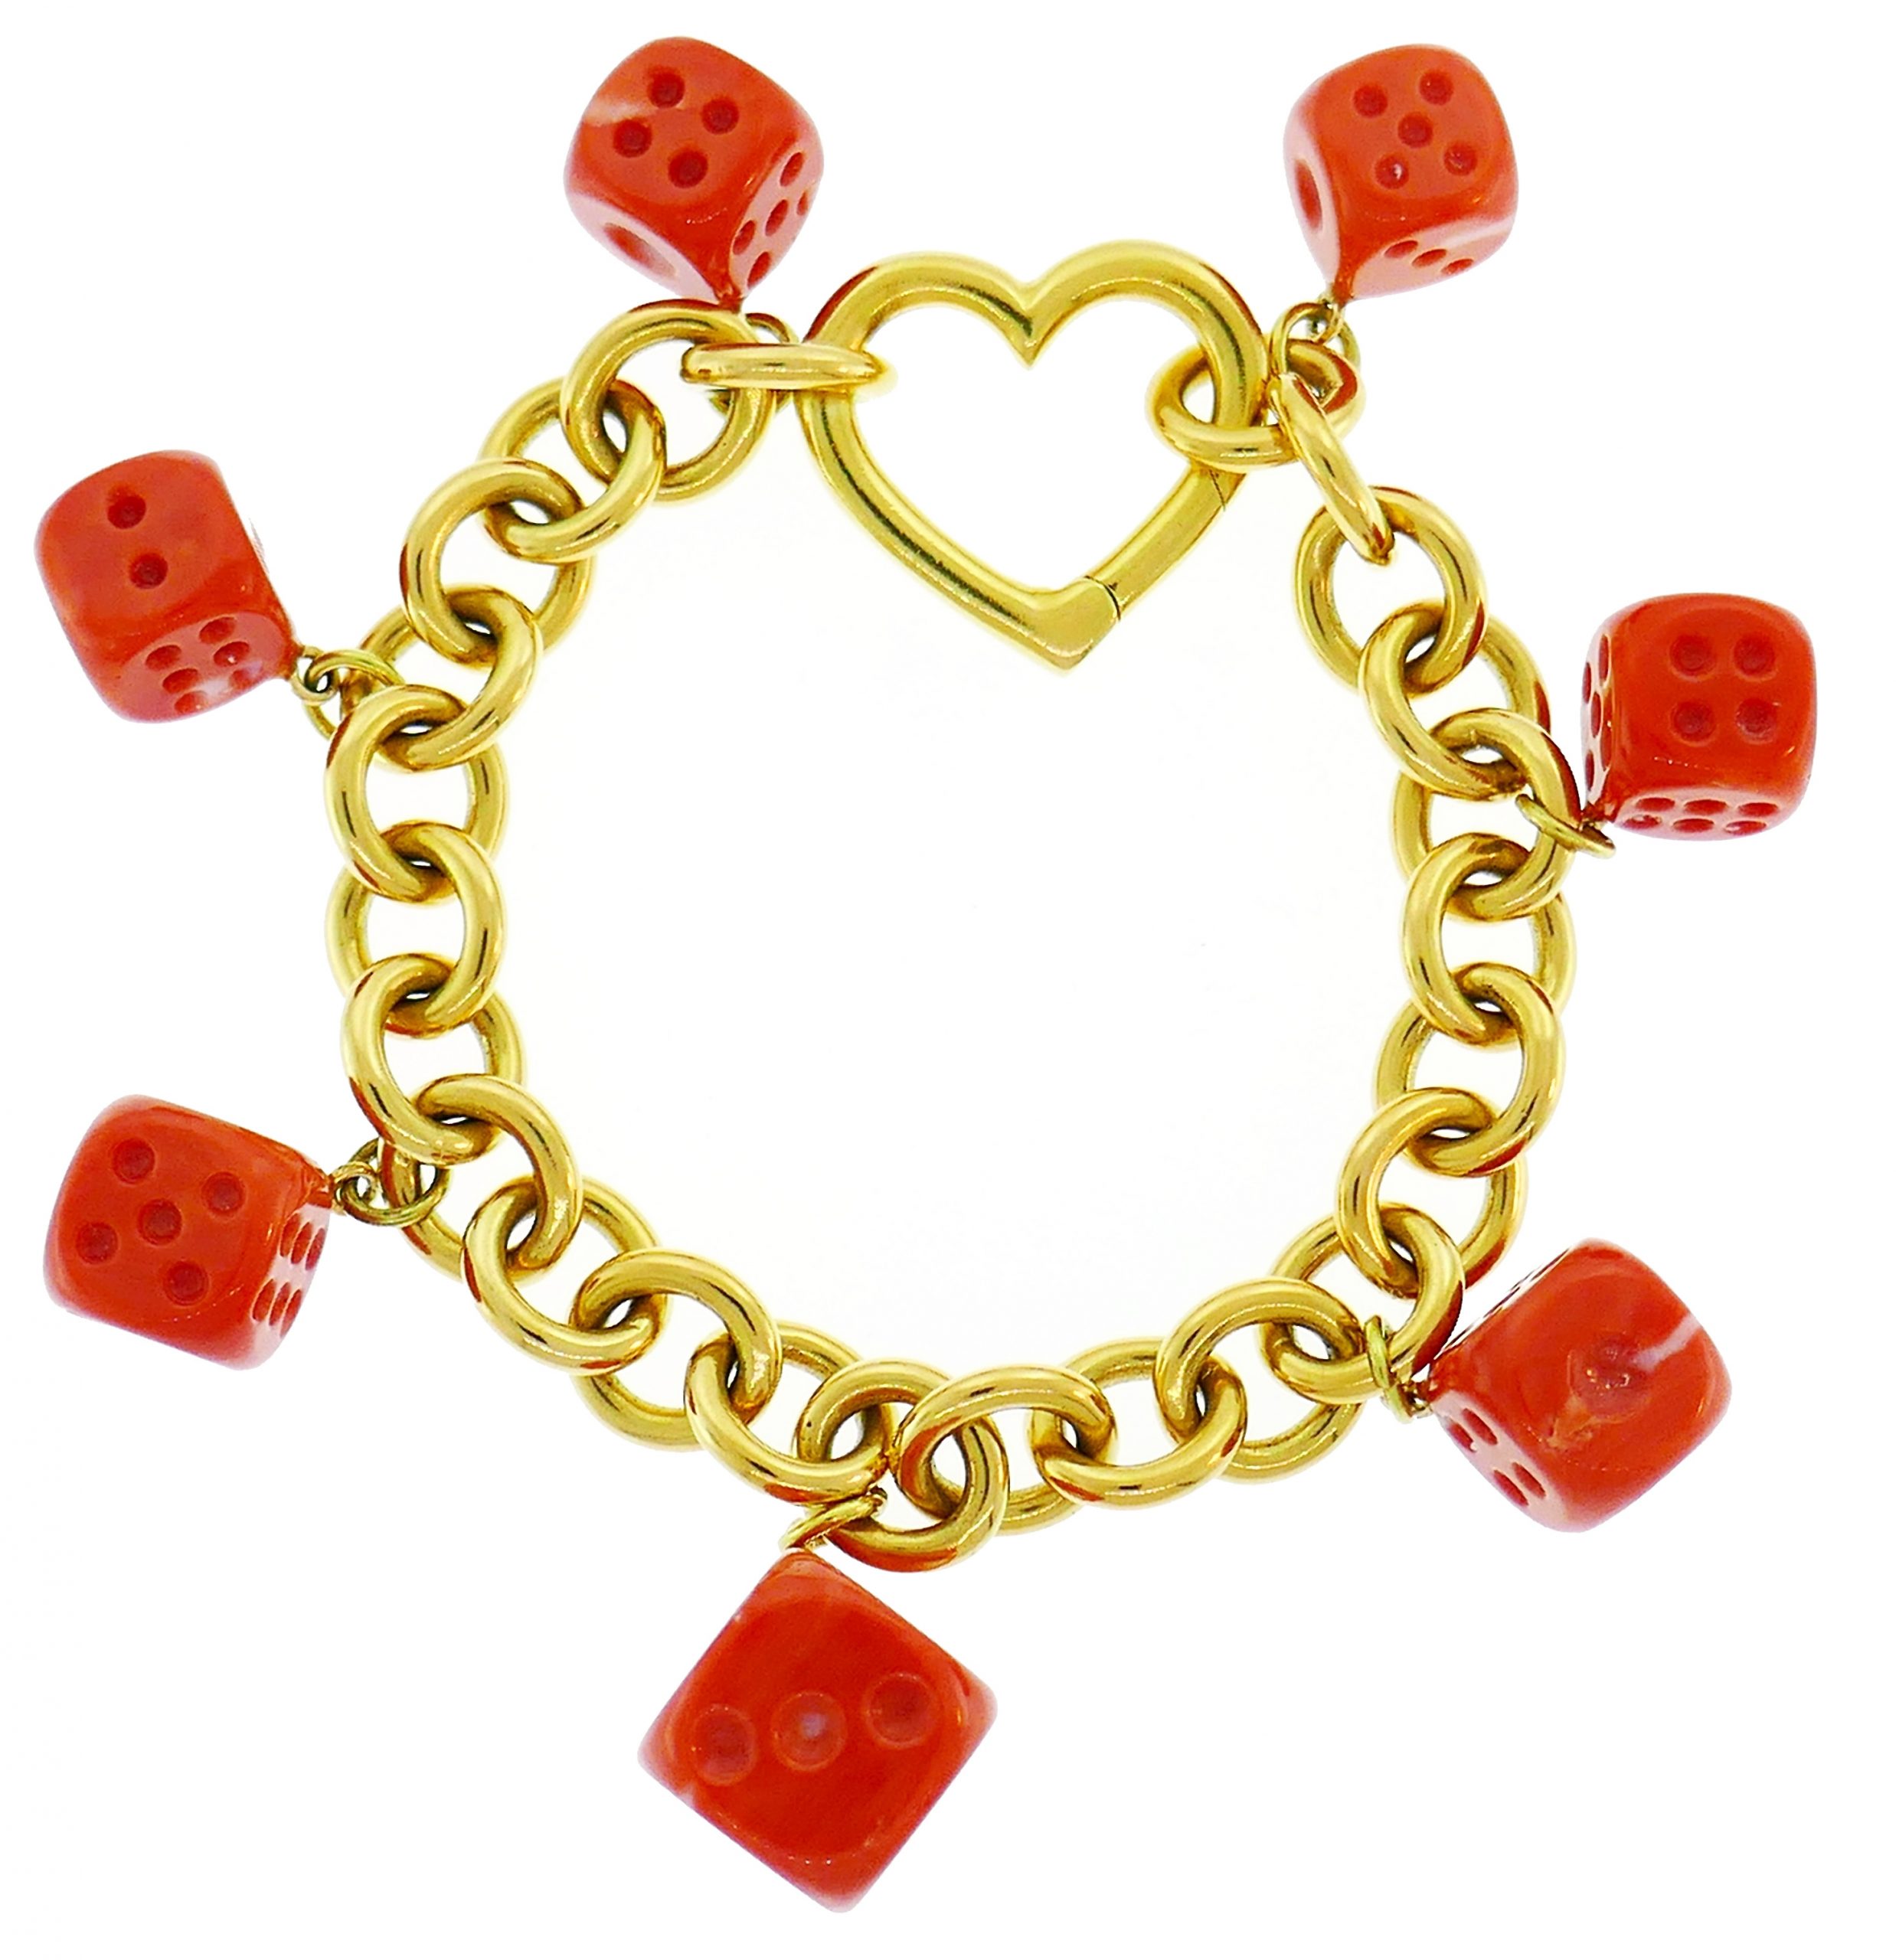 Tiffany & Co. Yellow Gold Coral Dice Charm Bracelet